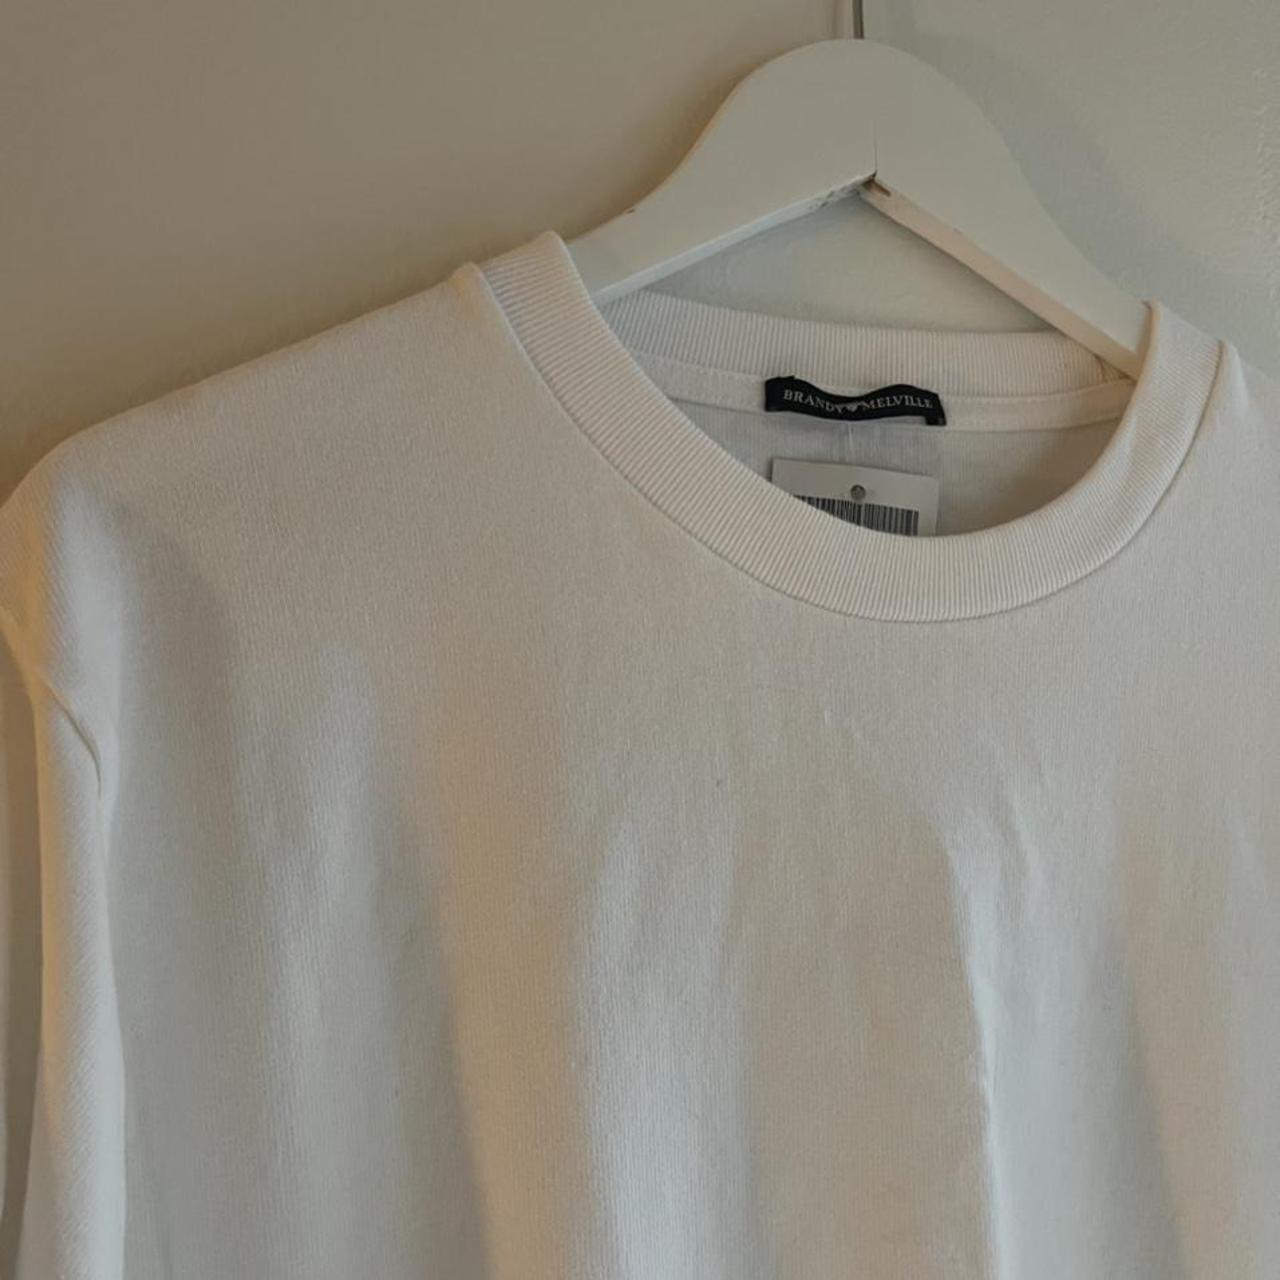 Product Image 3 - Brandy Melville White Sweatshirt Pullover